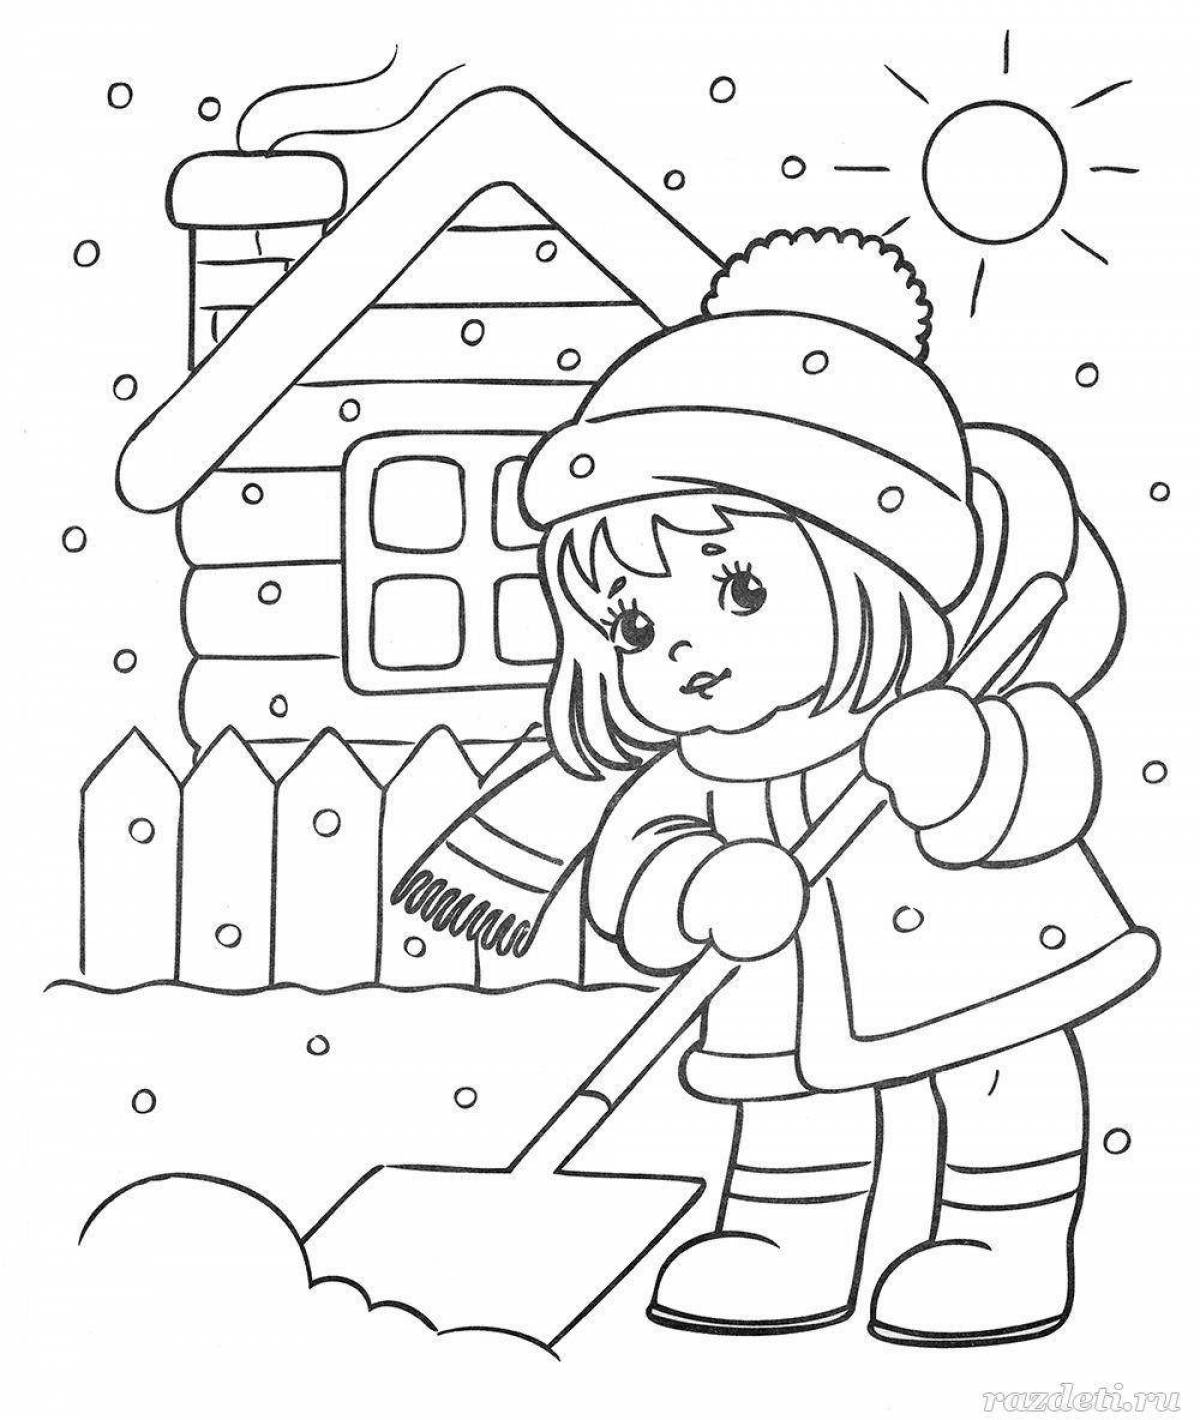 Bright winter coloring for kids